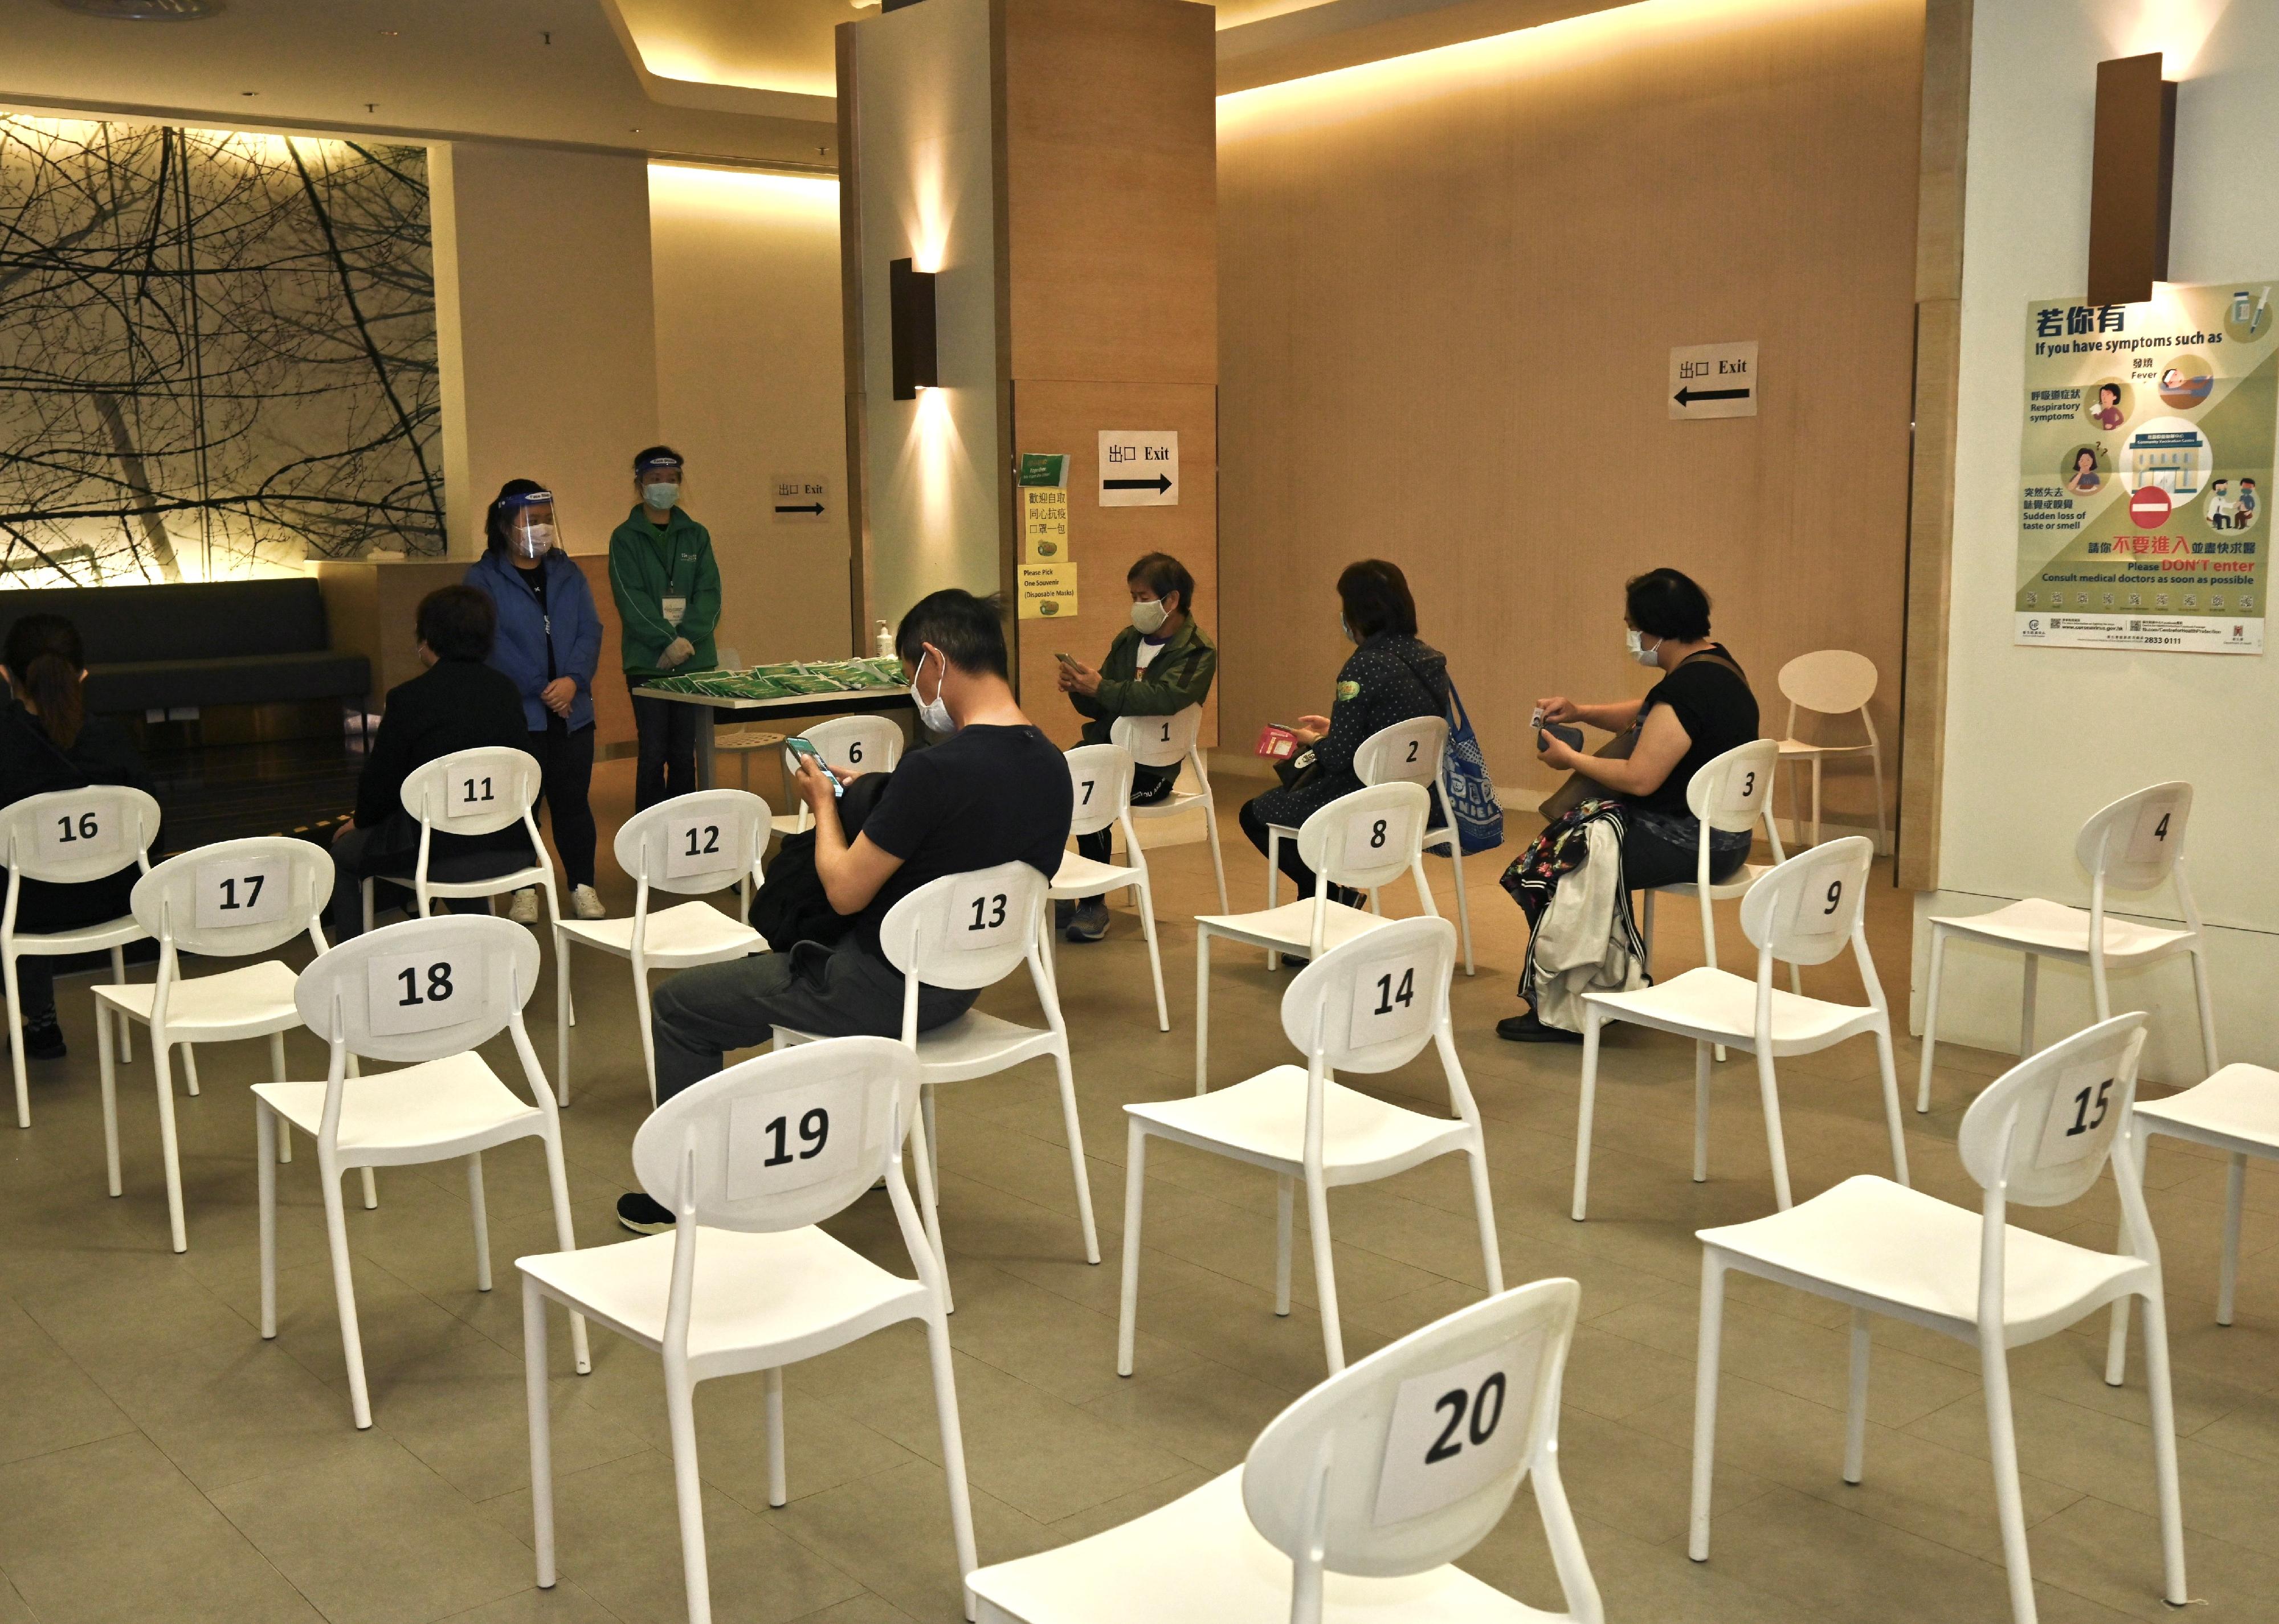 The Hong Kong Spinners Industrial Building Community Vaccination Centre is dedicated to providing the Sinovac vaccination service to children and teenagers aged 3 to 17 and persons aged 60 or above. Photo shows vaccinated people in the resting area.